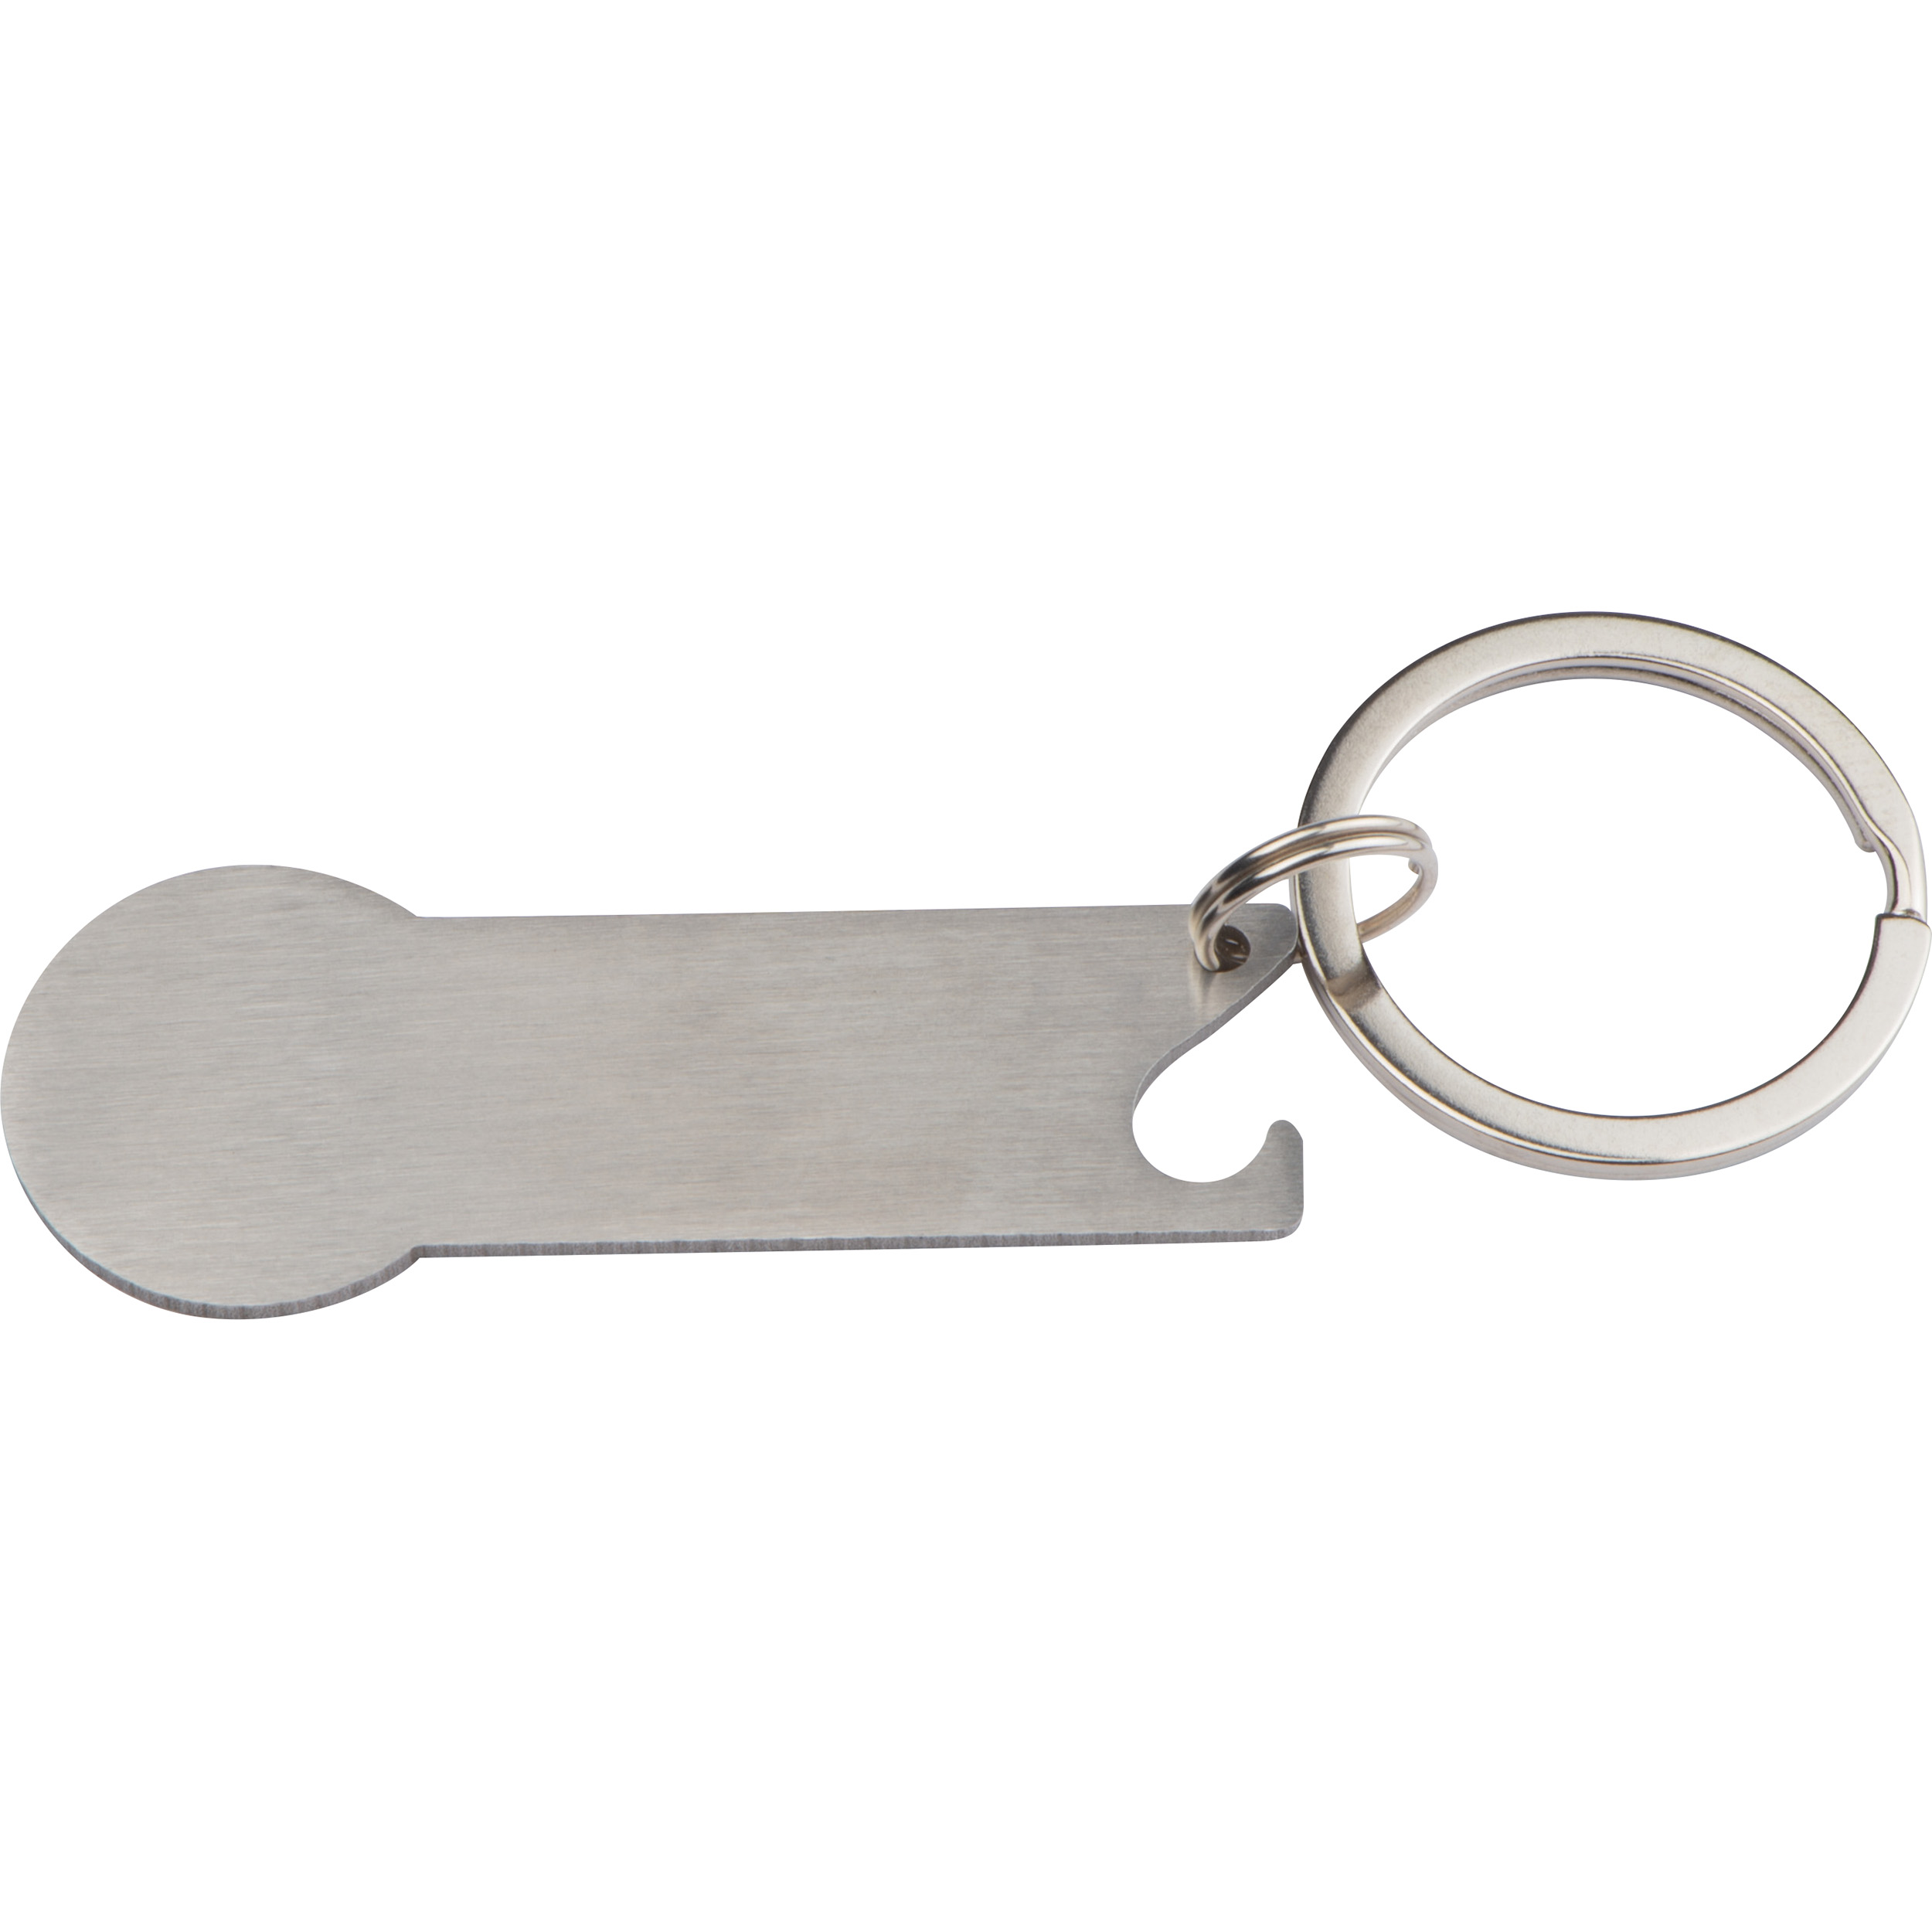 Keyring with shopping cart chip